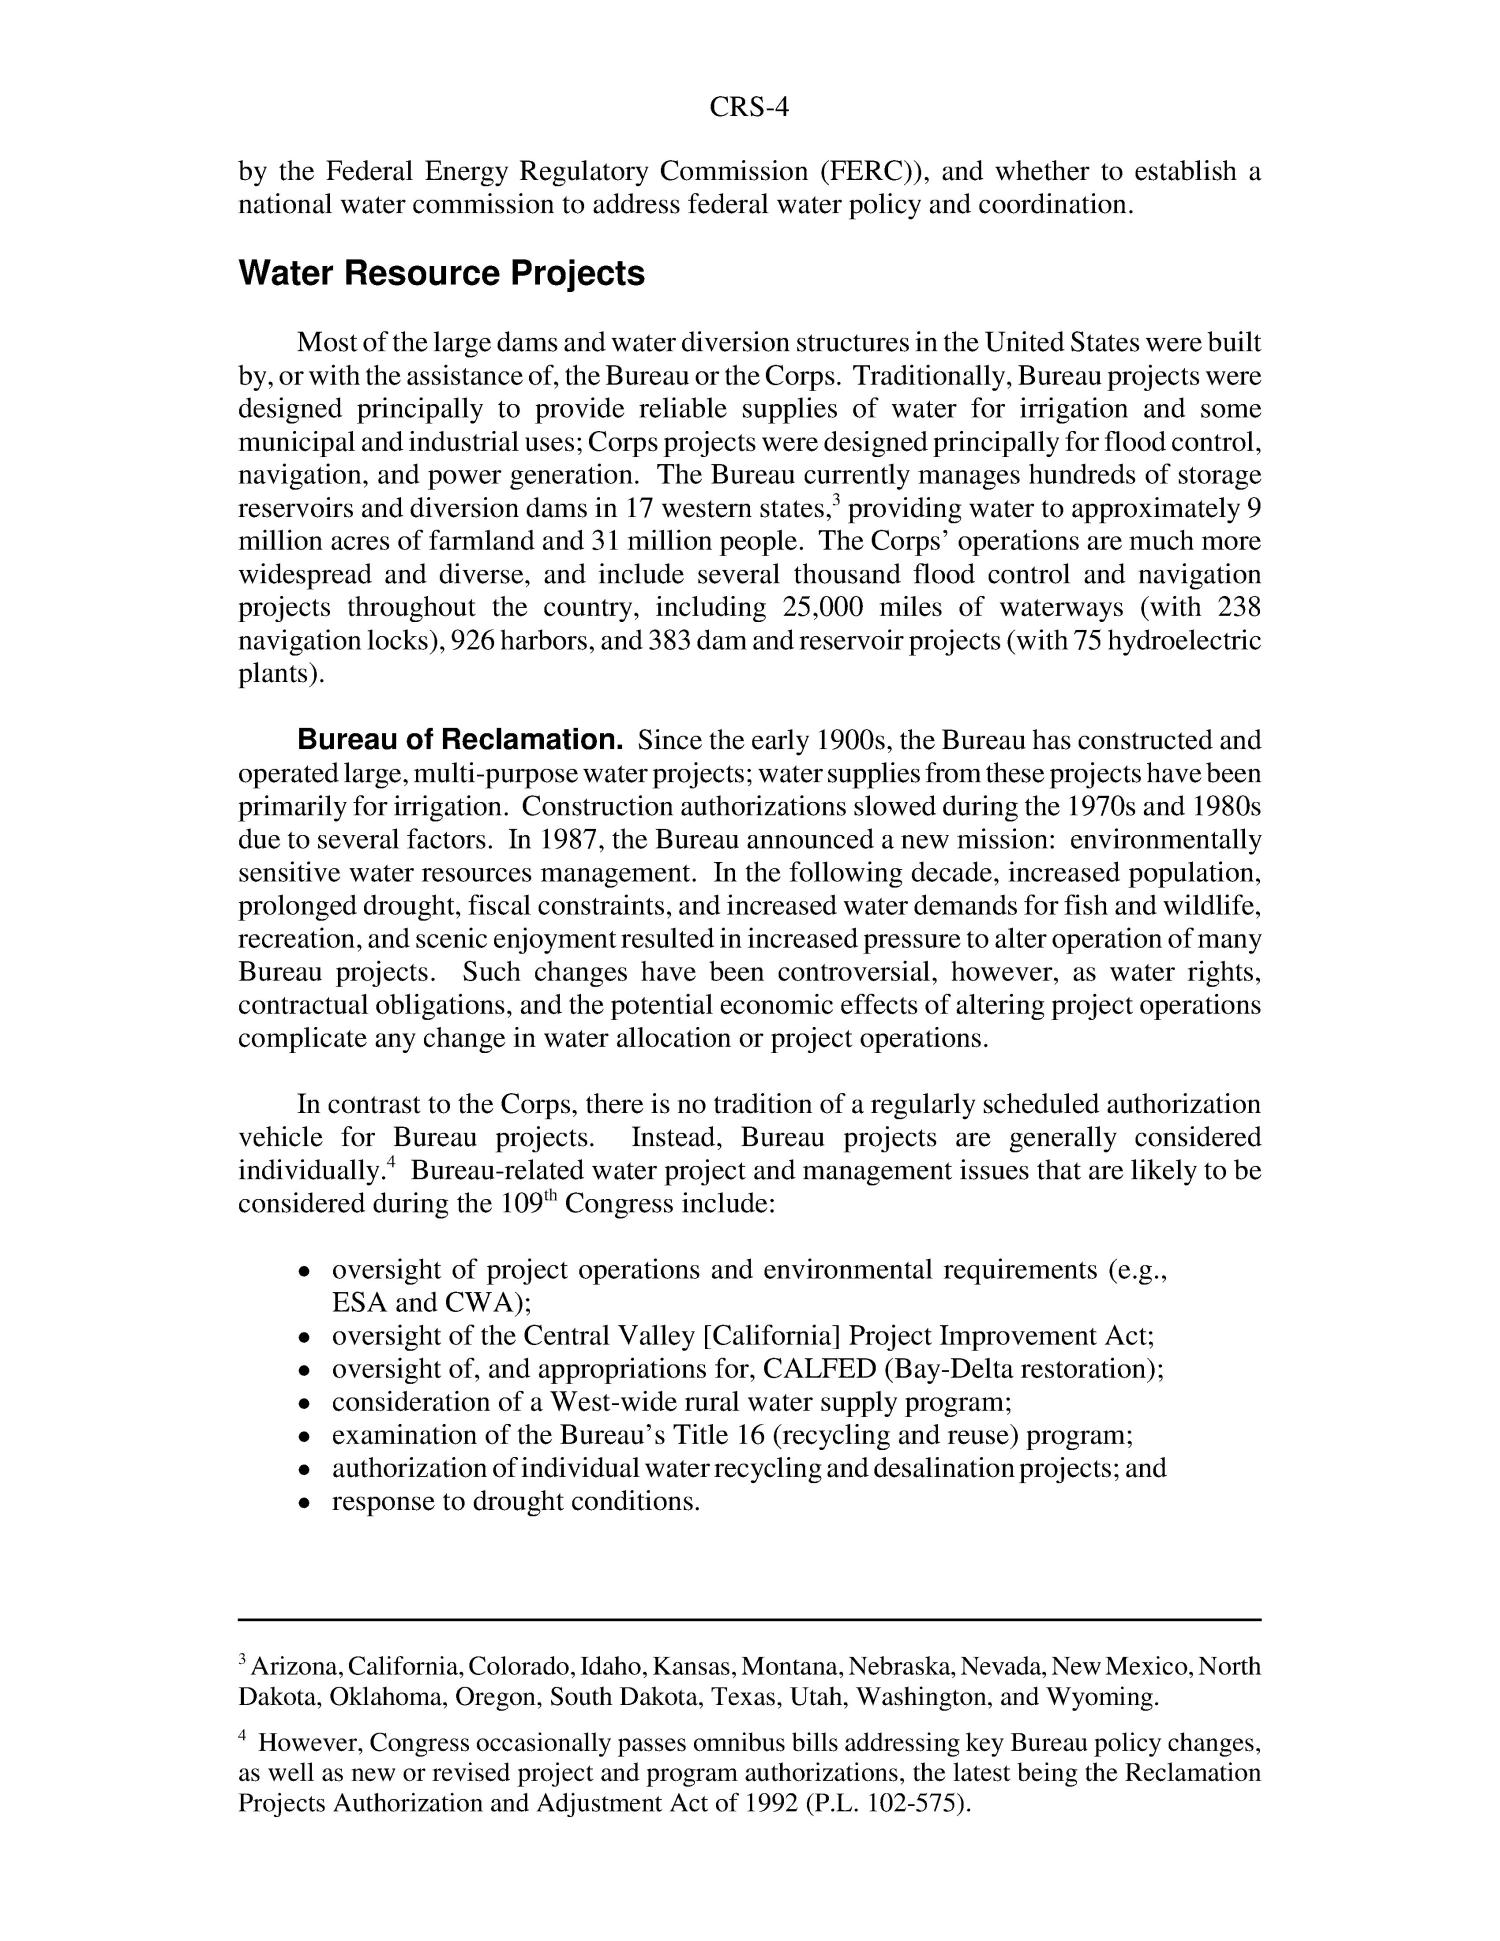 Water Resource Issues in the 109th Congress
                                                
                                                    [Sequence #]: 4 of 6
                                                